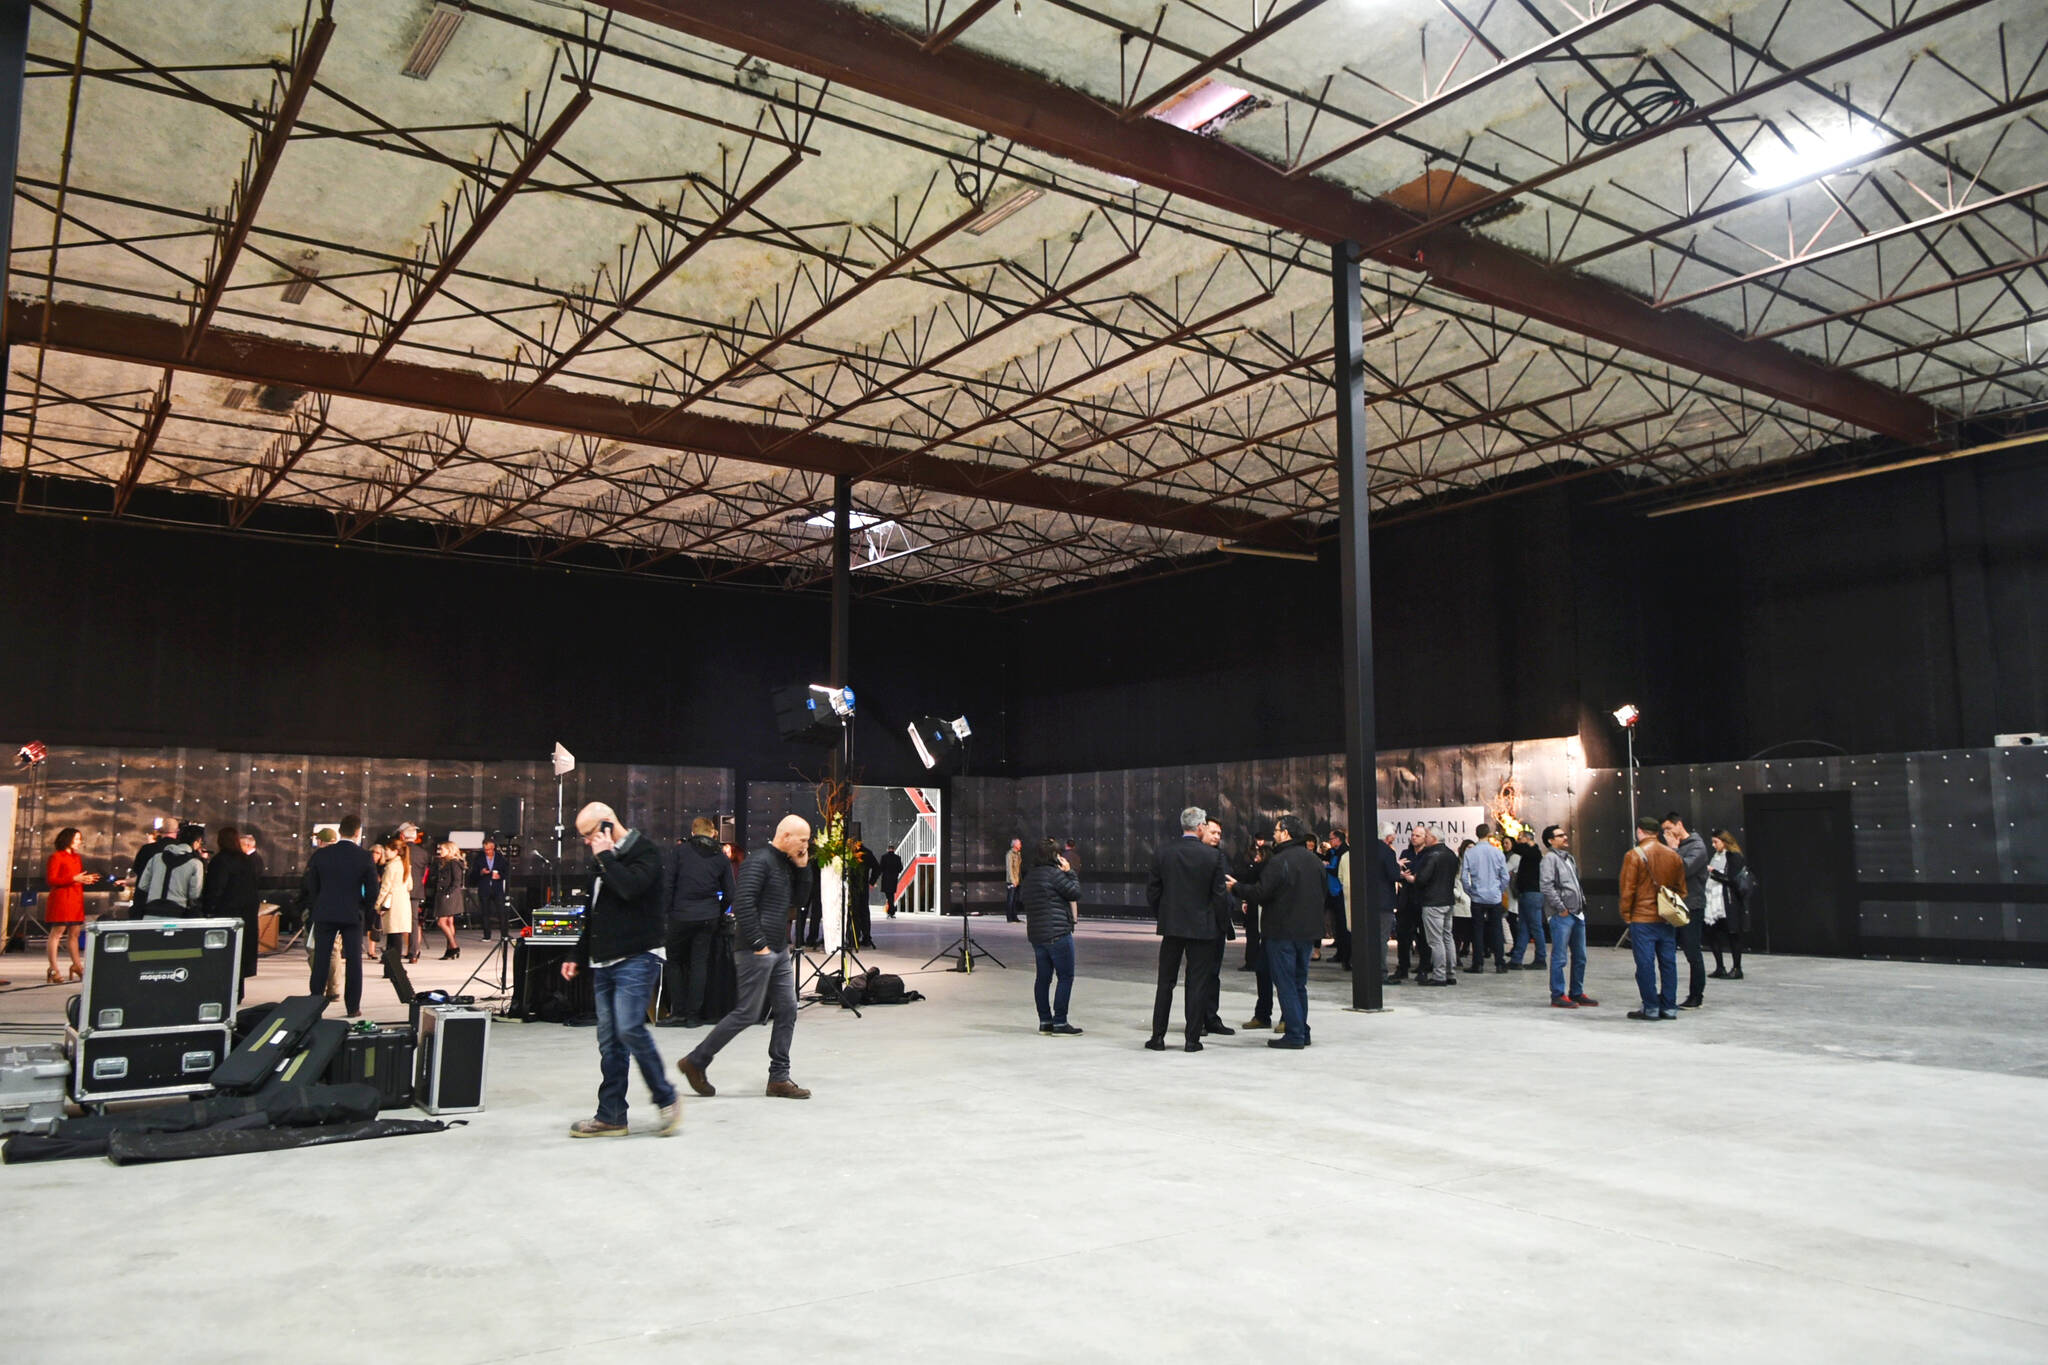 The first soundstages of Martini Film Studios were opened in North Langley in 2017. A plan to build a complex of more than 700,000 square feet has led to a legal action against Langley Township. (Langley Advance Times files)